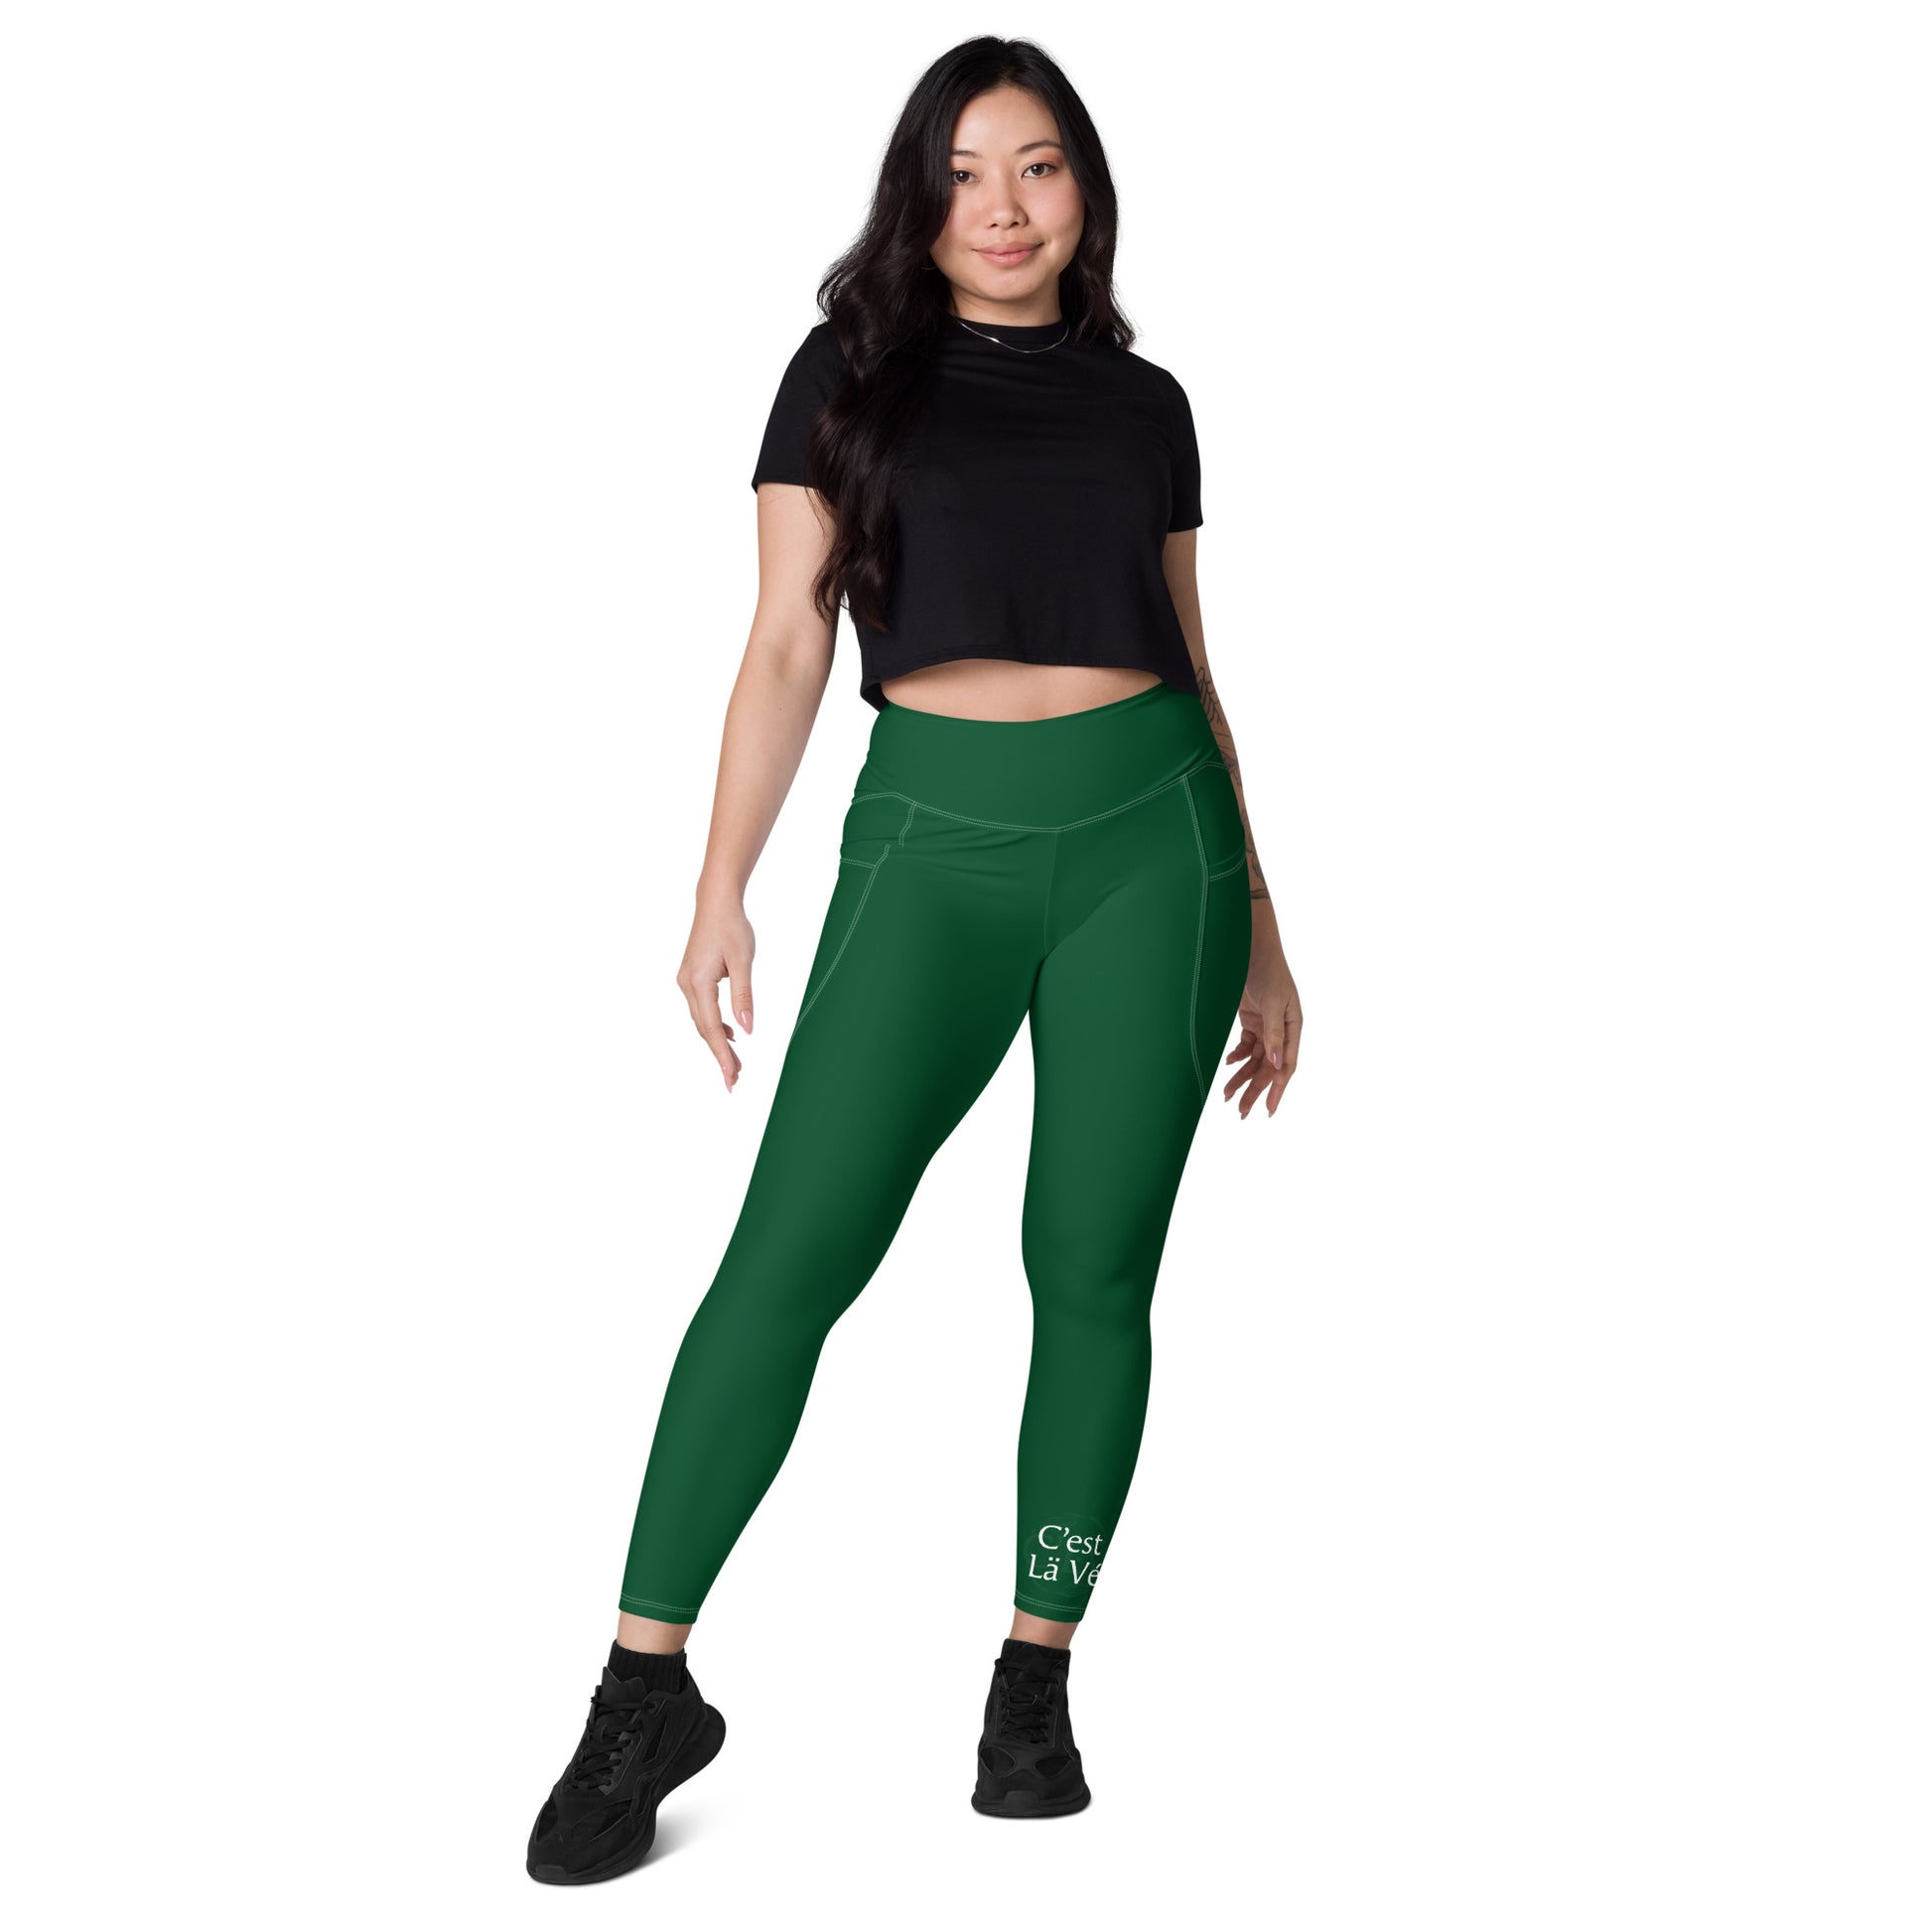 Clover Green Legging Tights, Sustainable Activewear